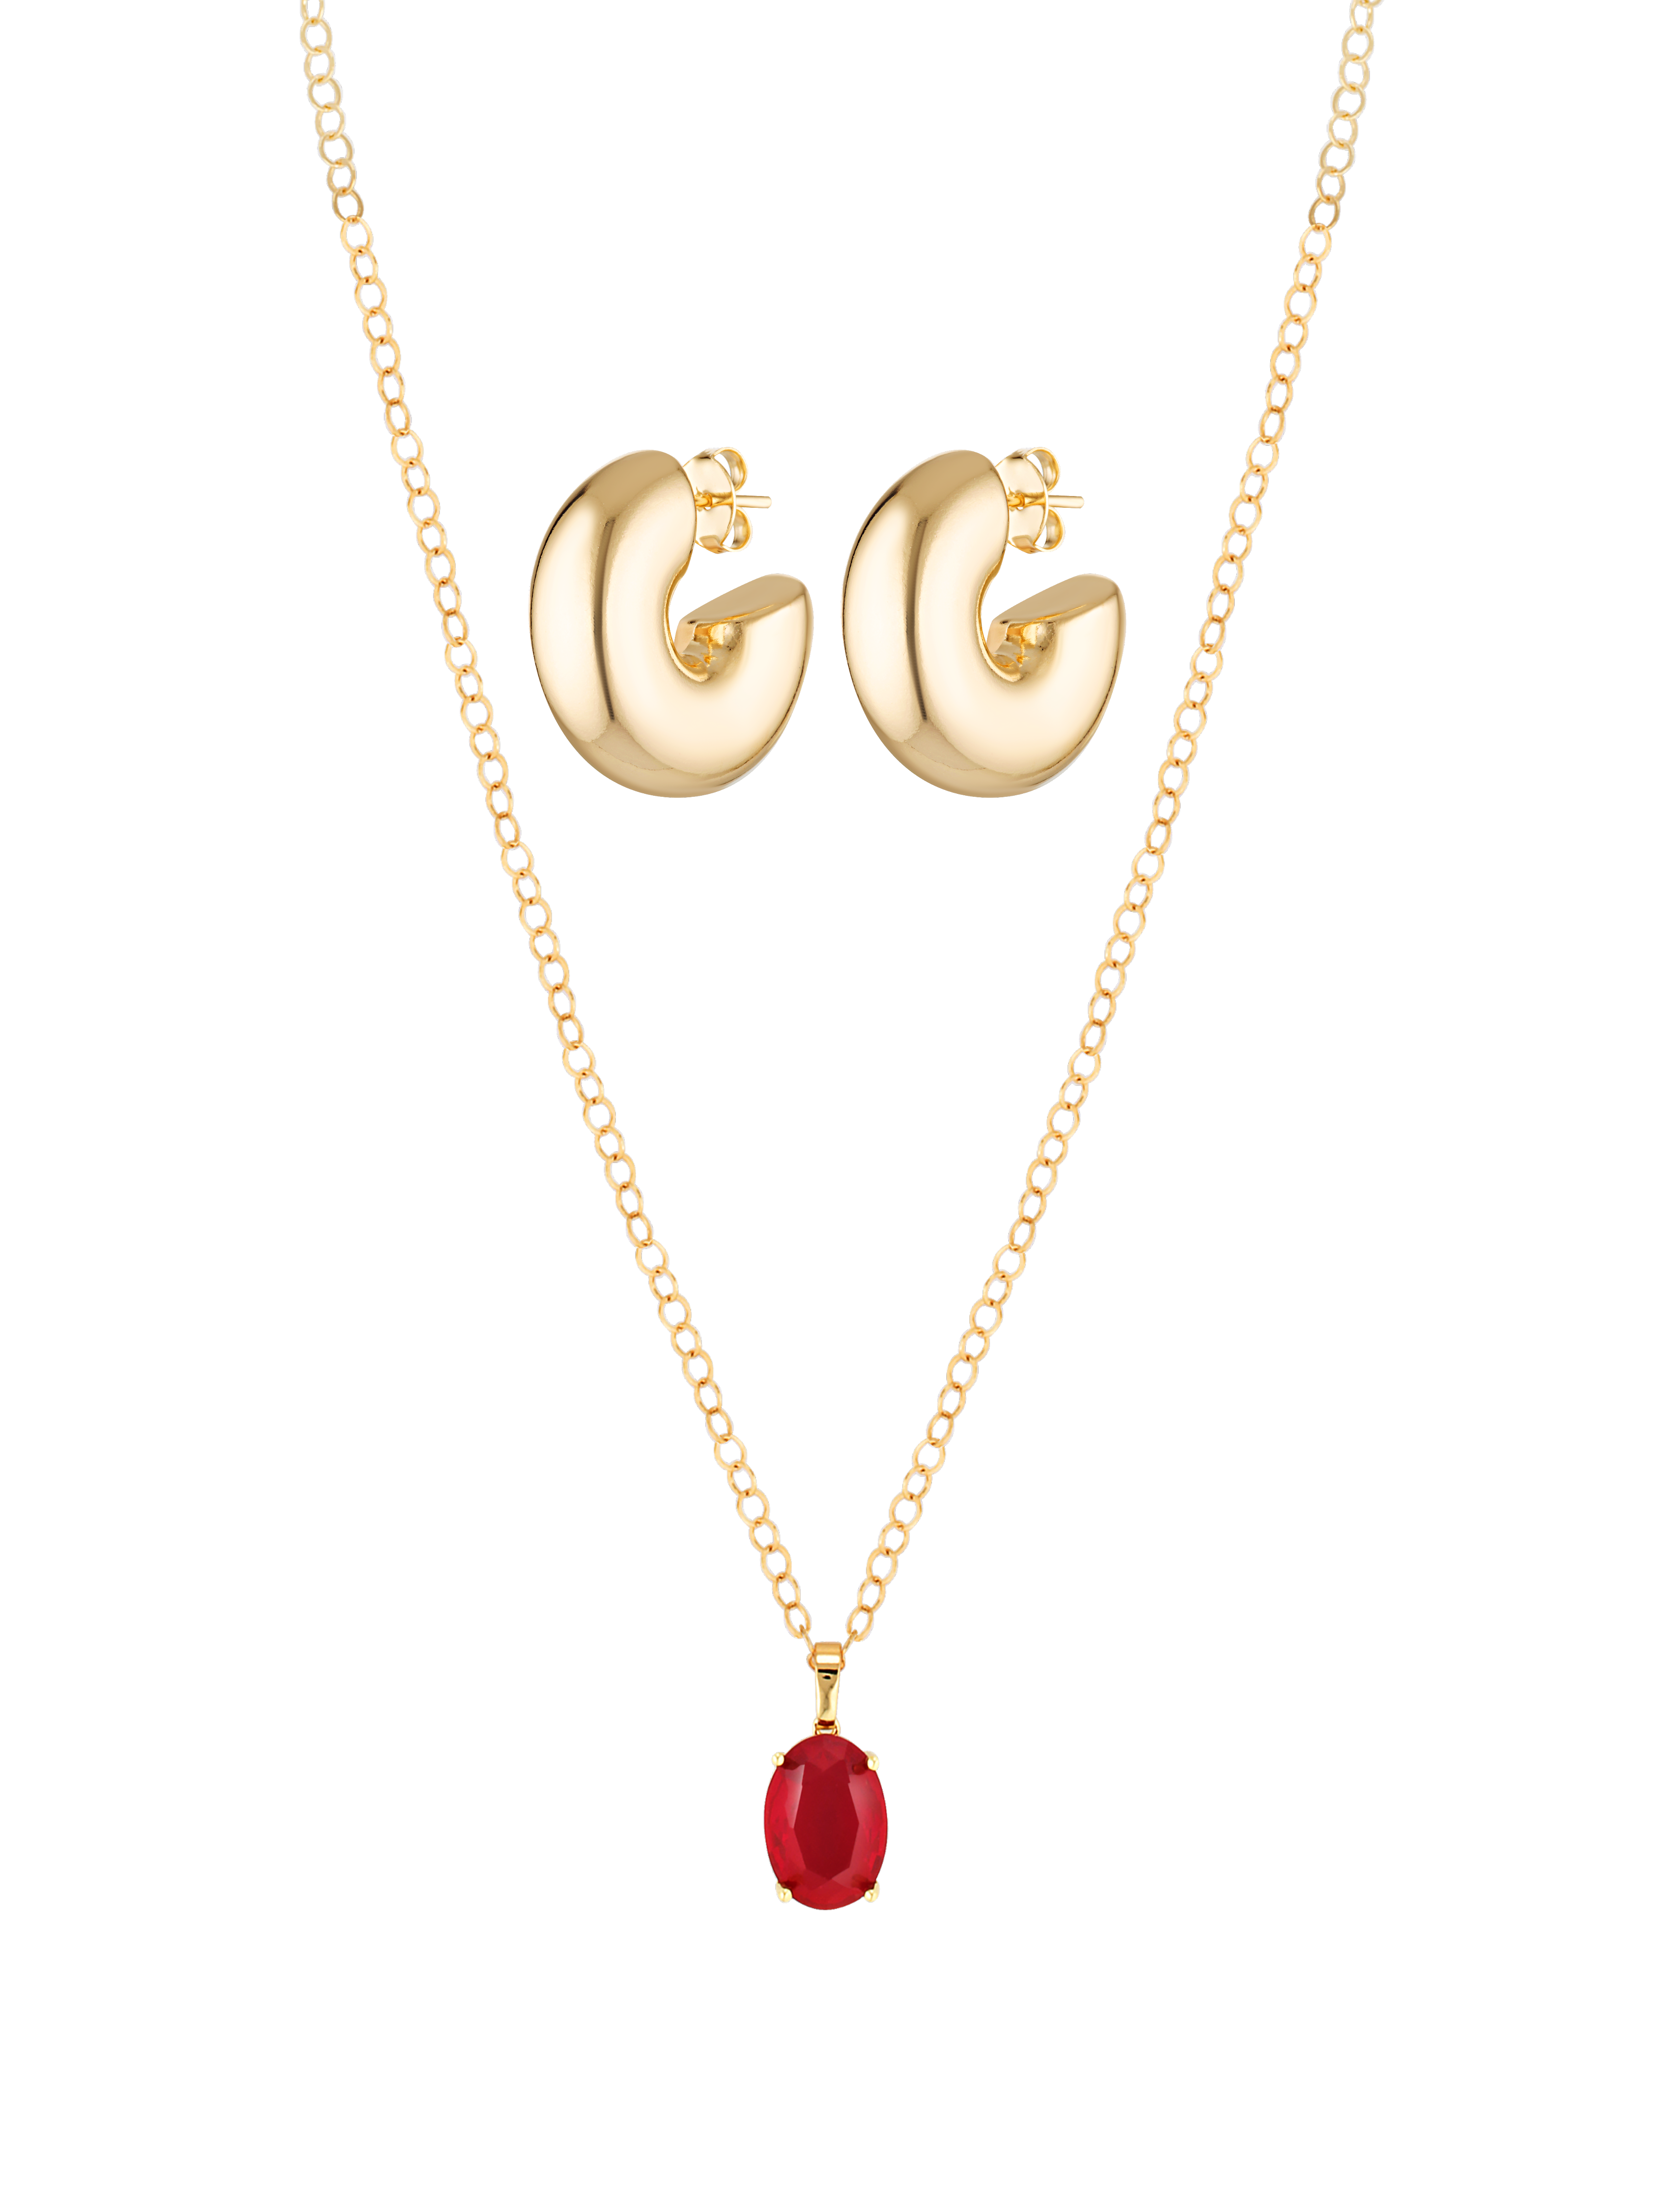 Beautiful large gold stud hoops and red crystal pendant necklace in 18k gold fill set 